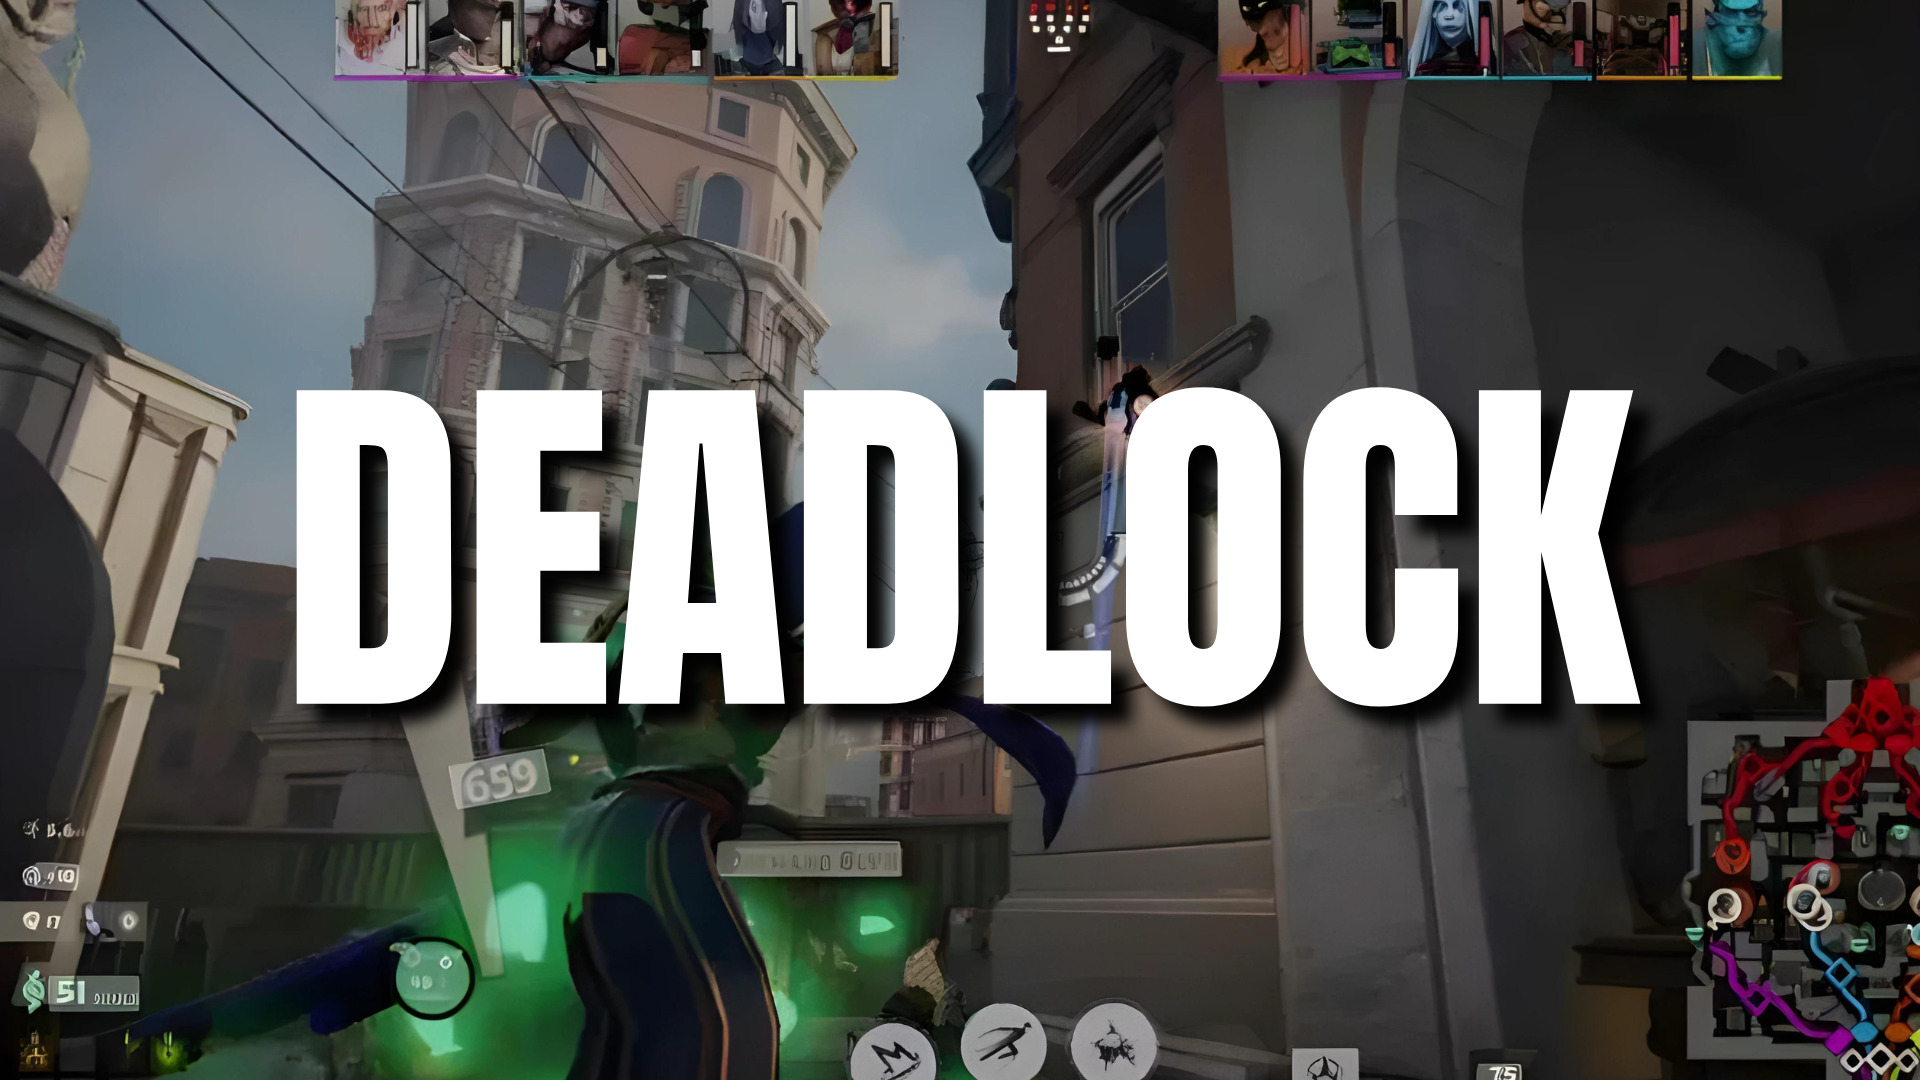 Valve's next game, Deadlock: Leaks and more details | esports.gg